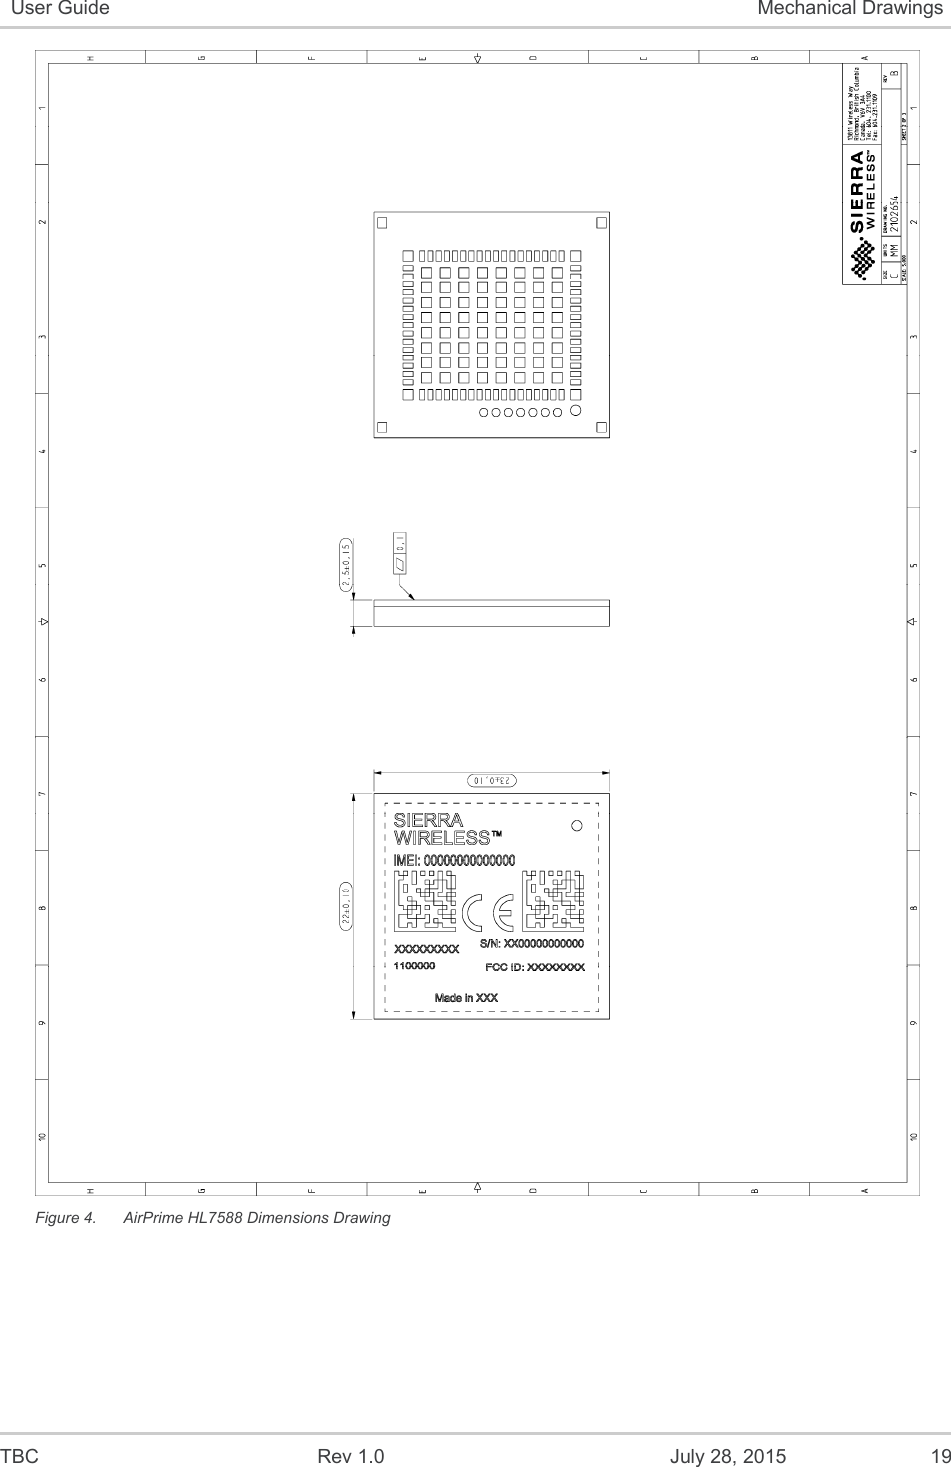  TBC  Rev 1.0  July 28, 2015  19 User Guide  Mechanical Drawings  Figure 4.  AirPrime HL7588 Dimensions Drawing 